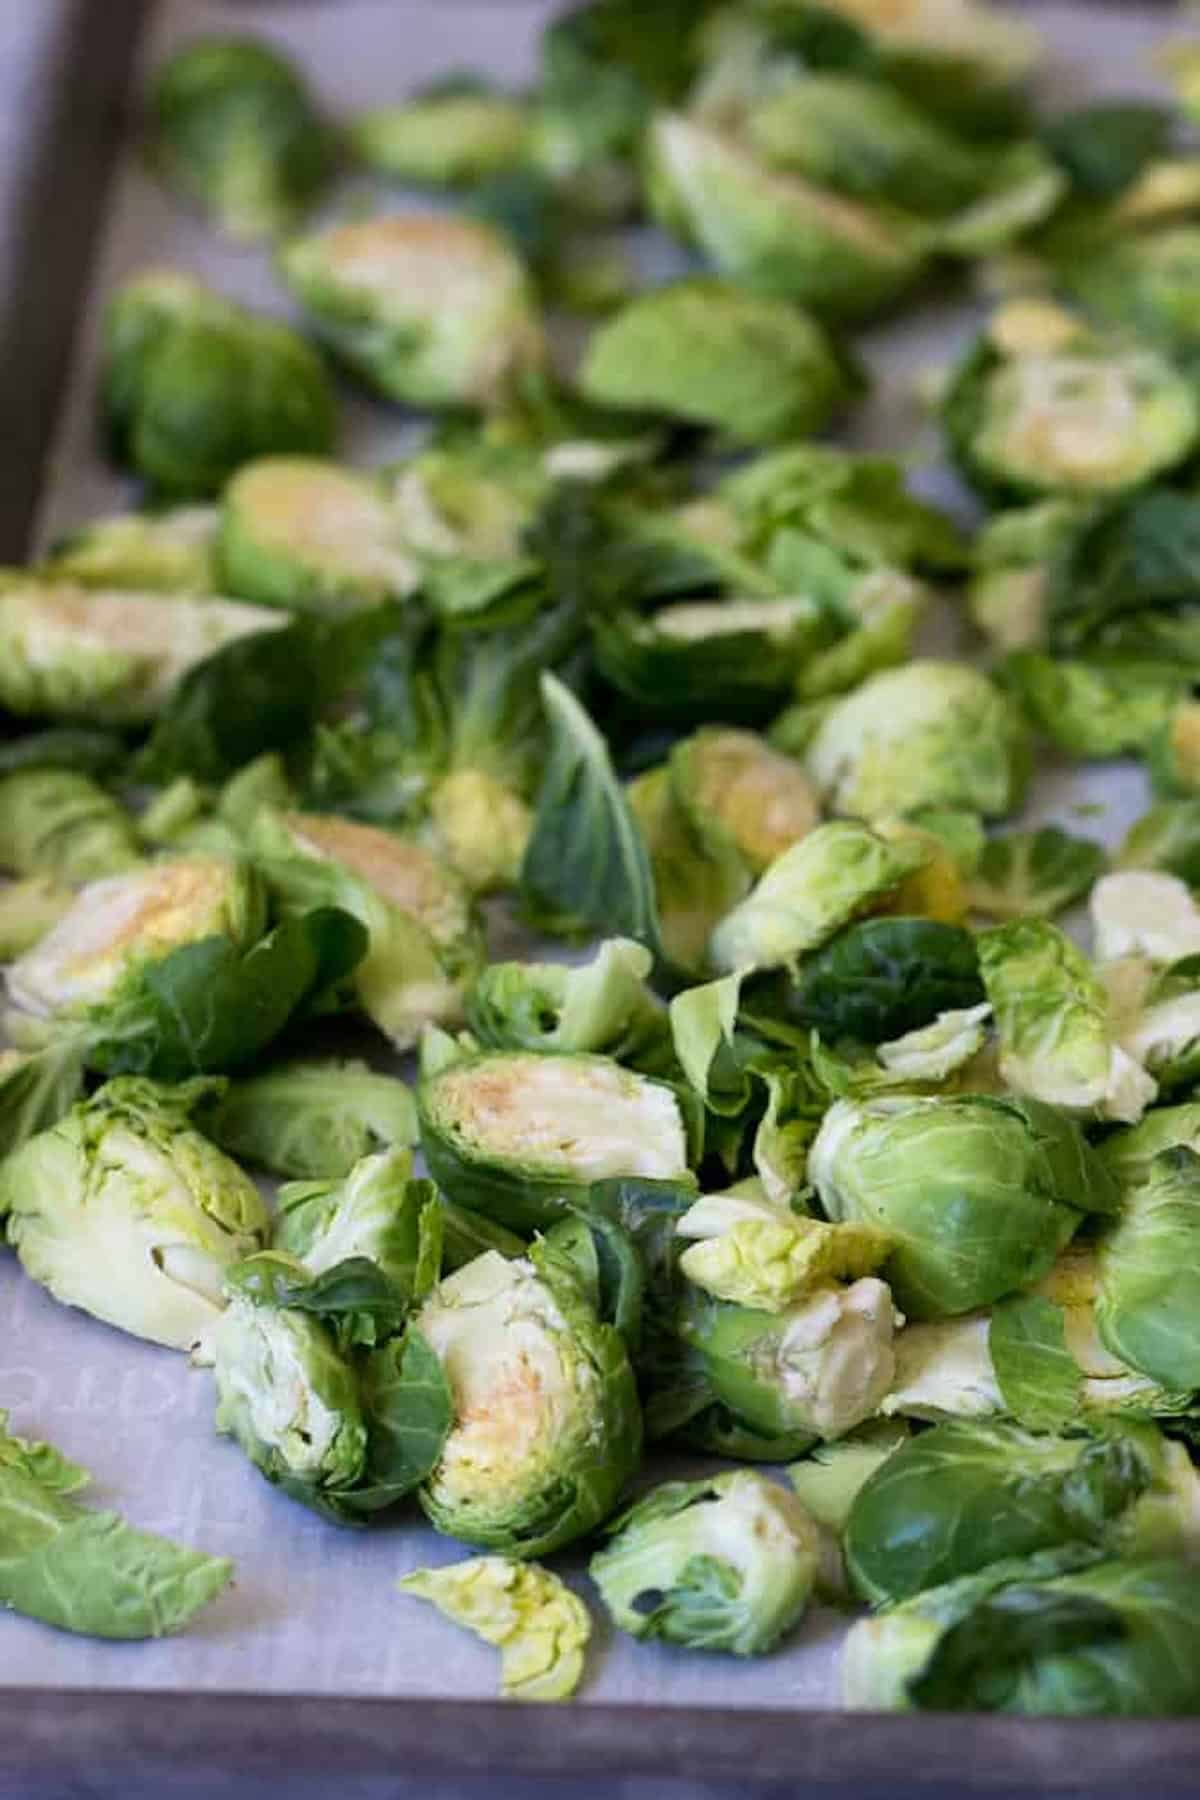 A tray of halved Brussels sprouts prepared for roasting, displayed on parchment paper.